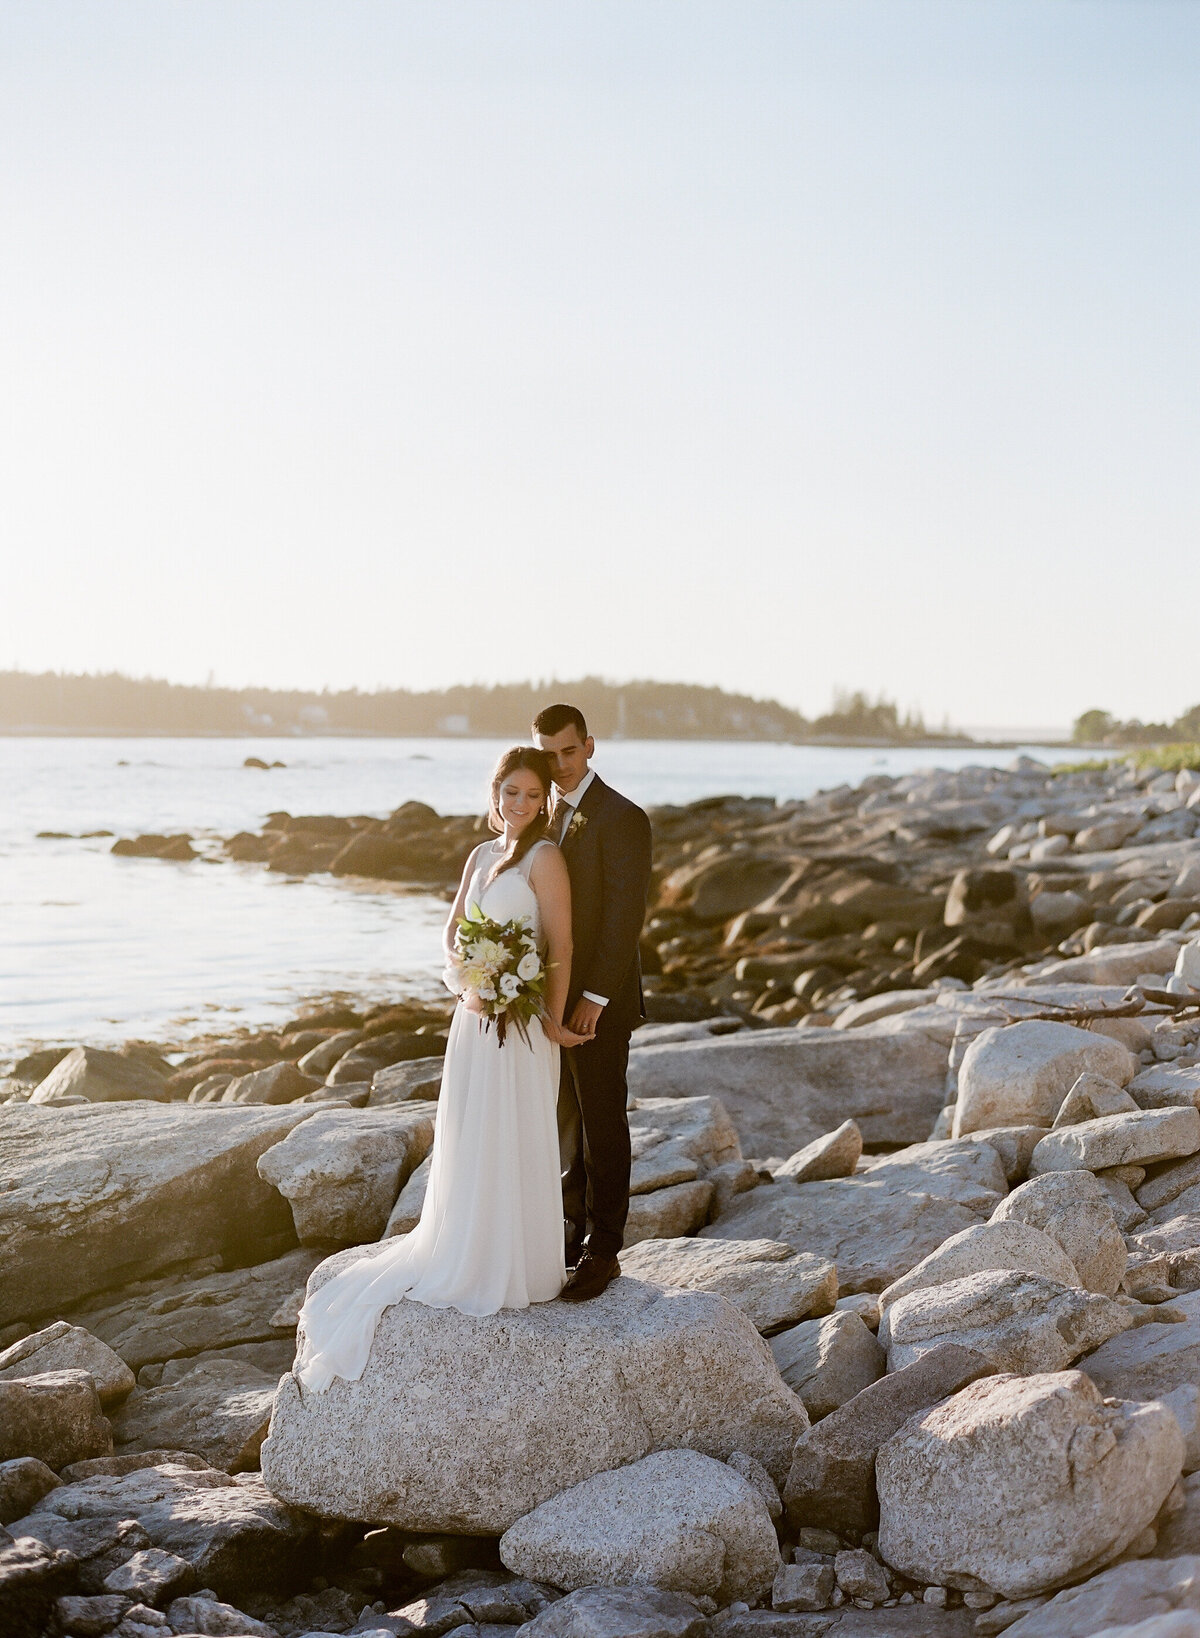 Jacqueline Anne Photography - Halifax Wedding Photographer - Jaclyn and Morgan-102